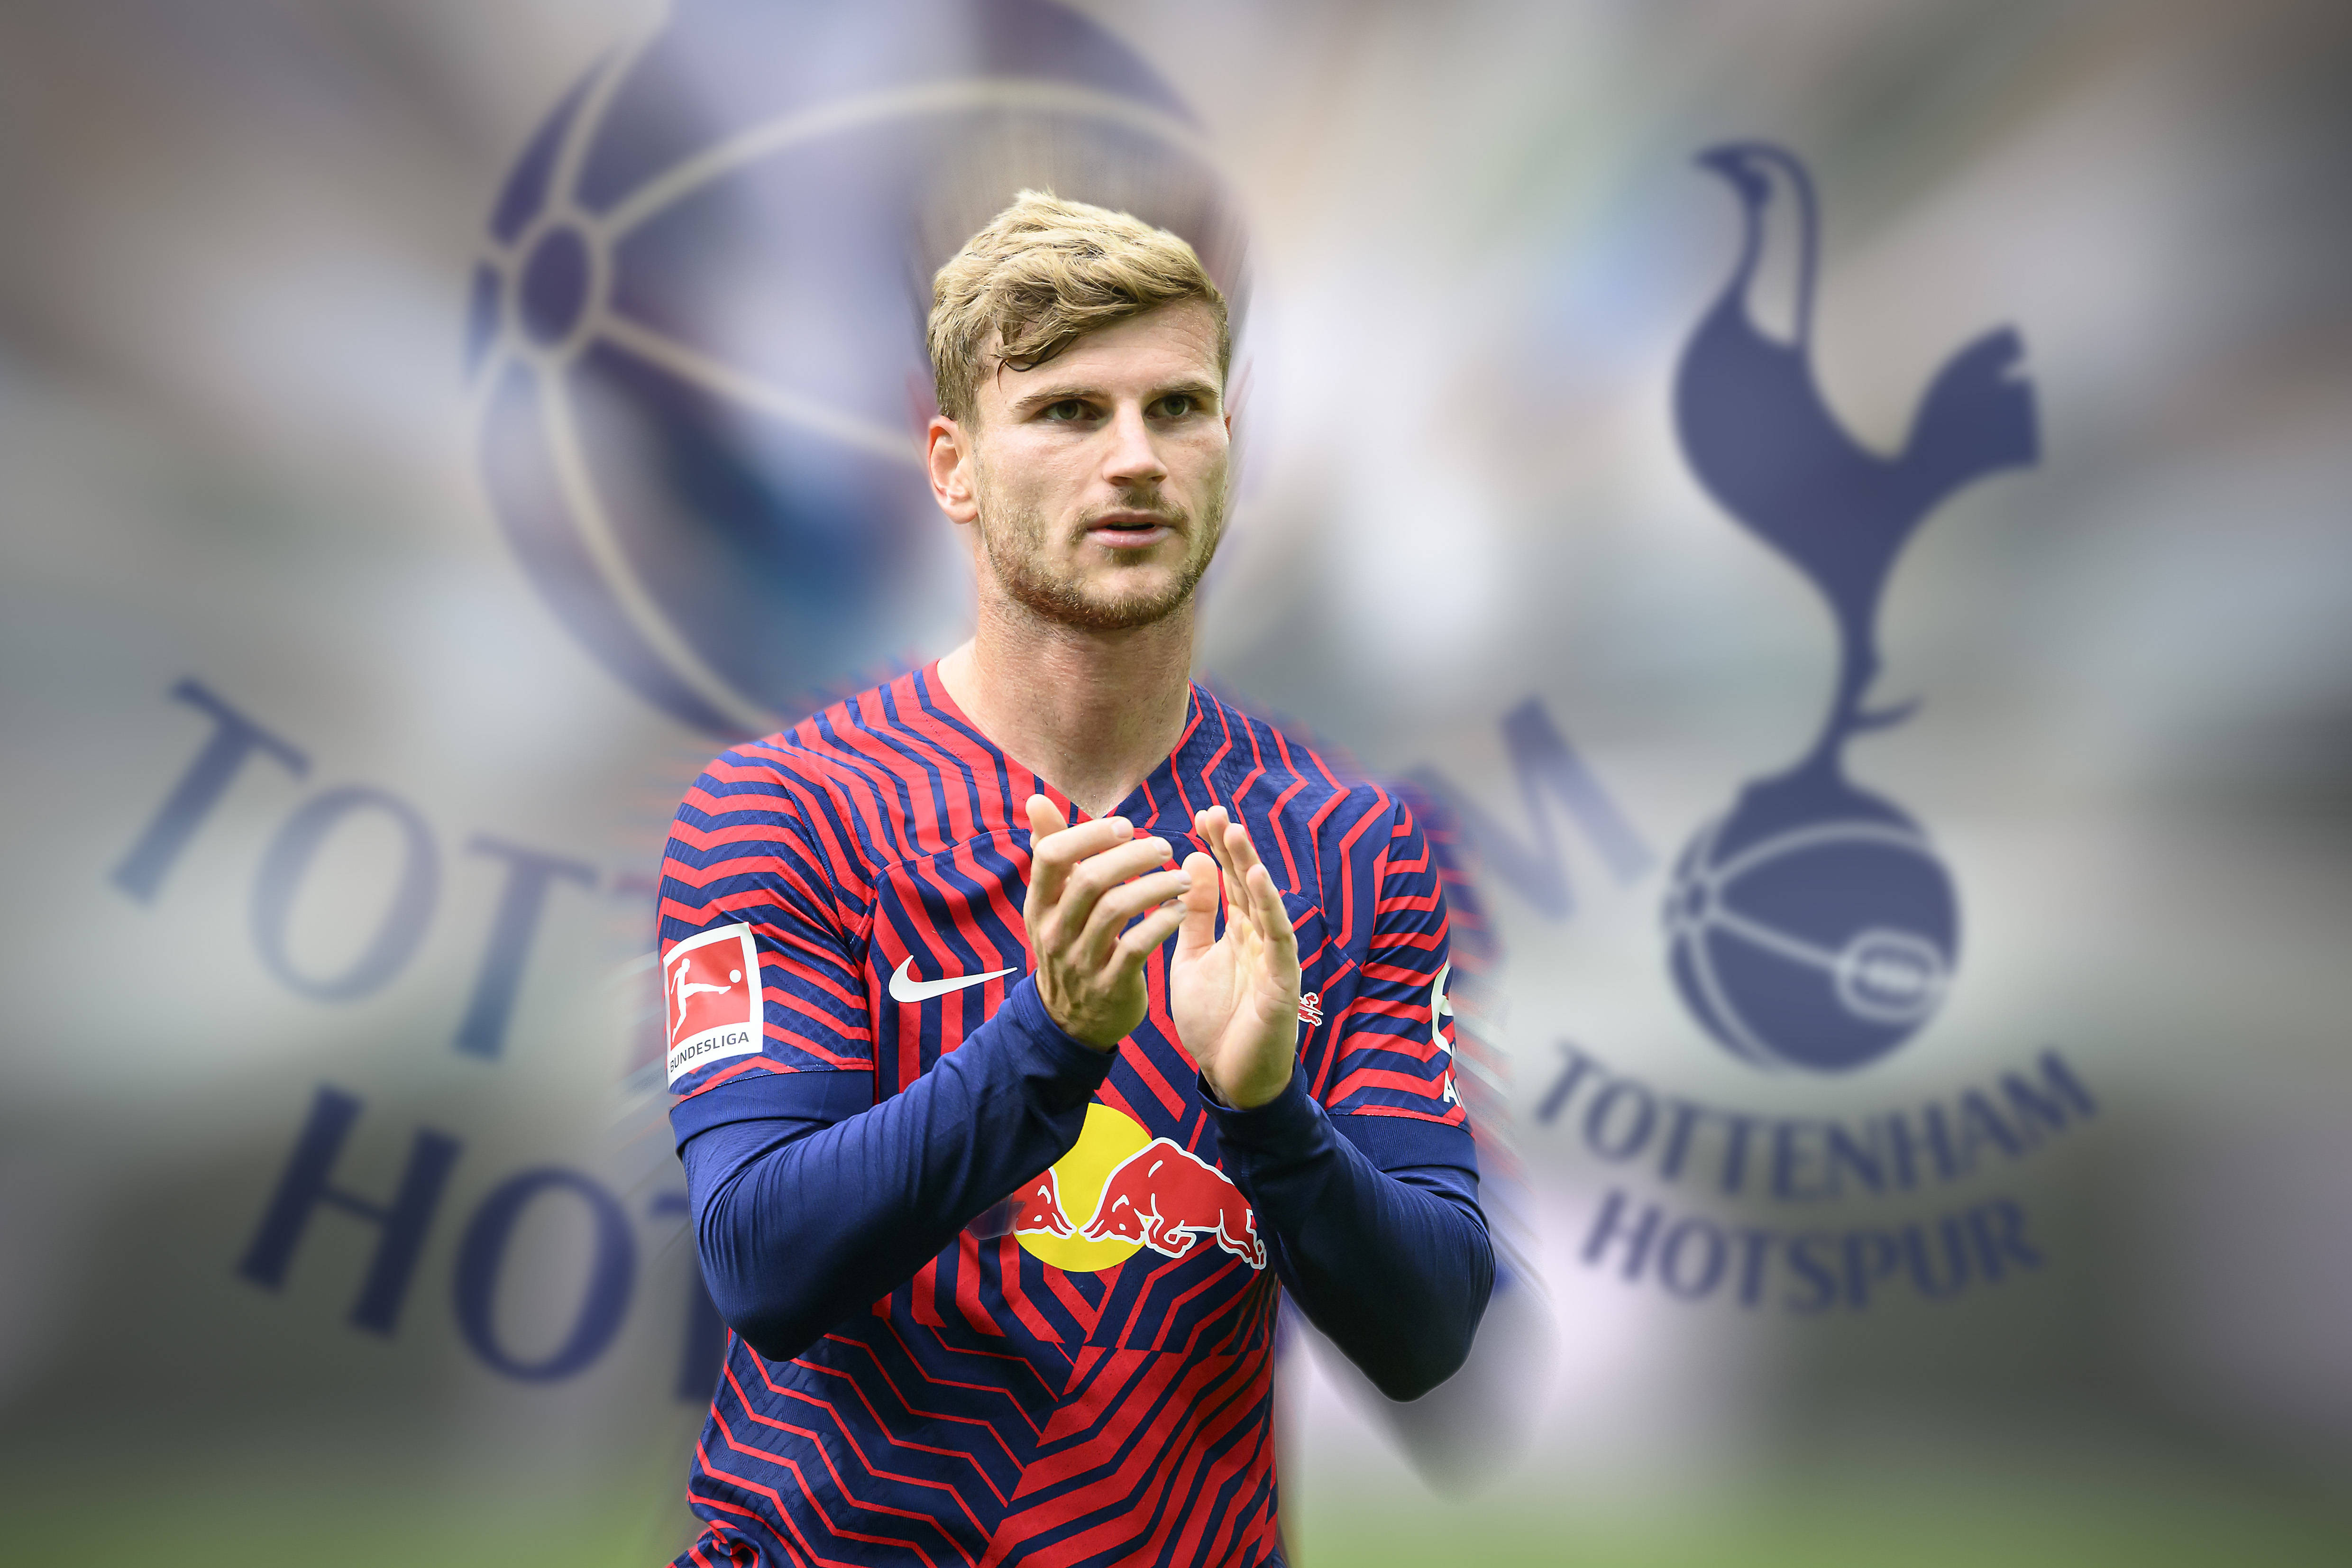 A composite image showing Timo Werner dressed in an RB Leipzig jersey in front of a giant Tottenham Hotspur logo